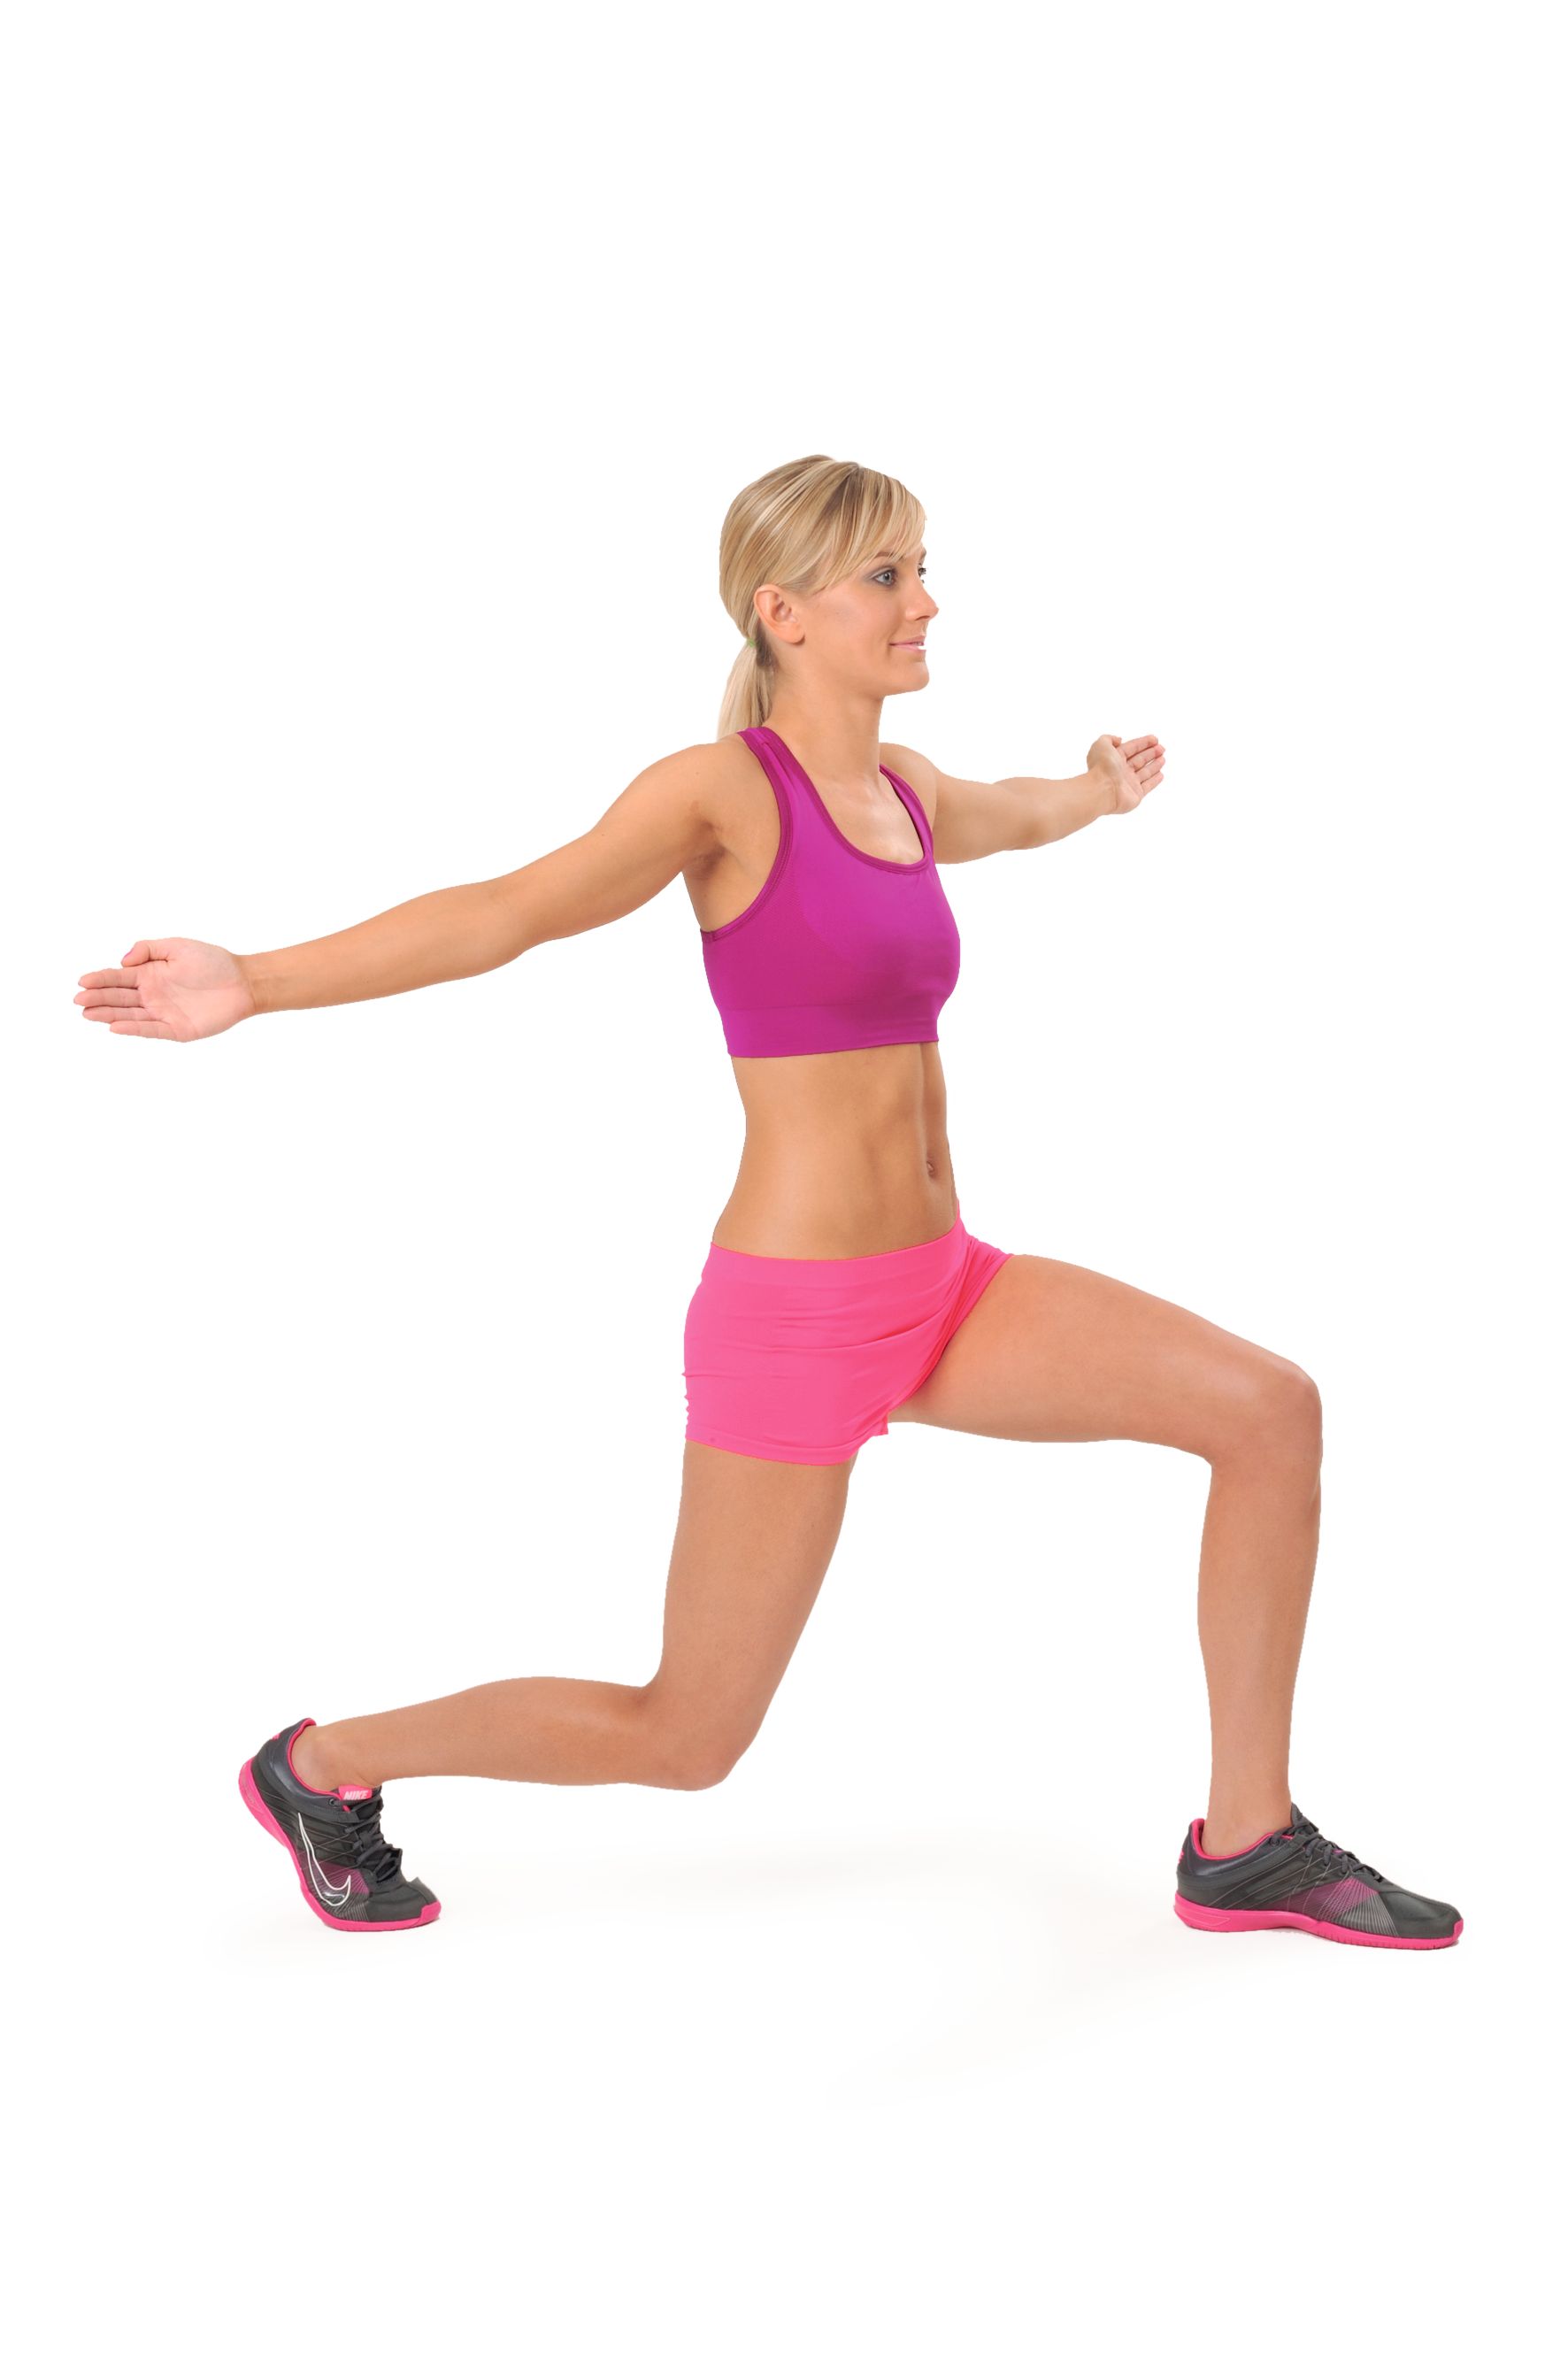 how to warm up for exercise dynamic stretches